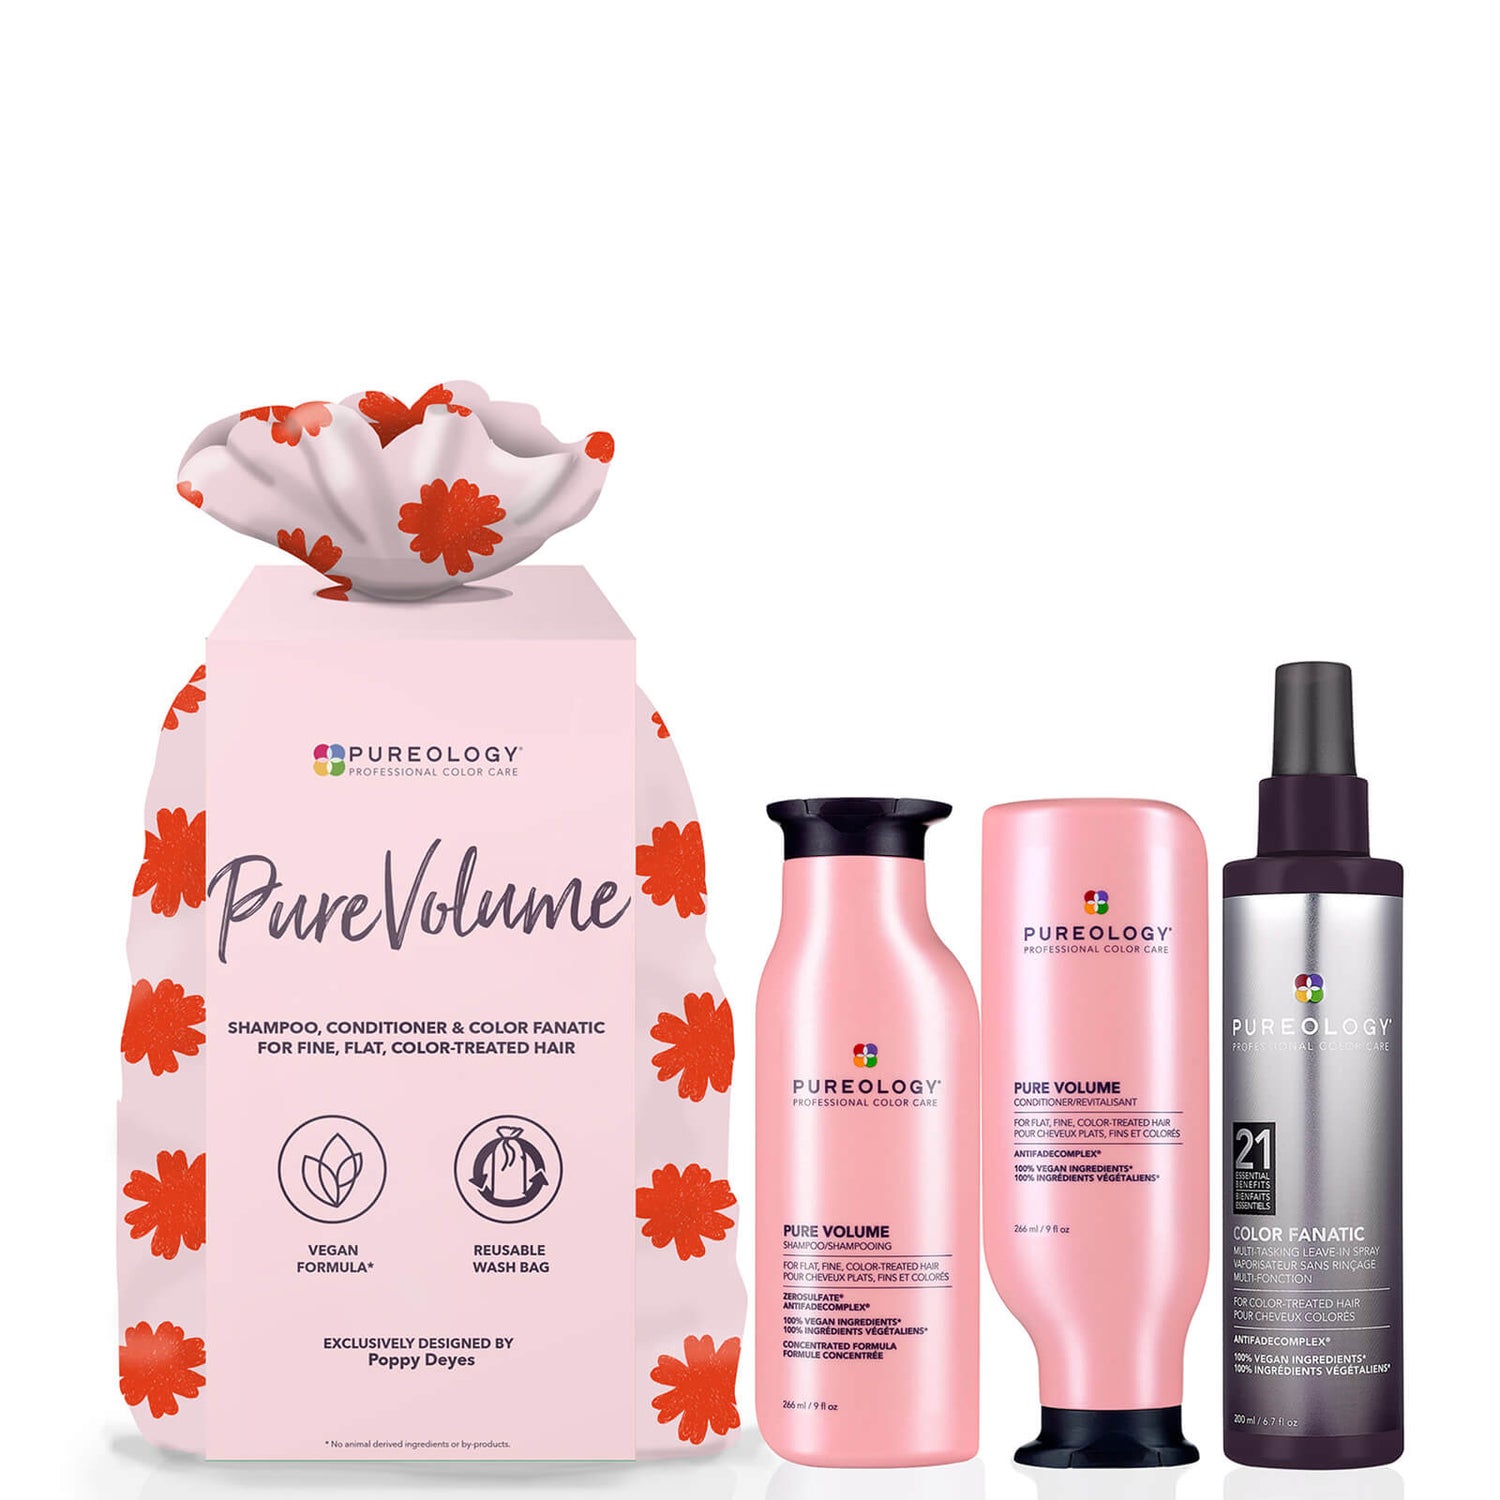 Pureology Pure Volume and Color Fanatic Set